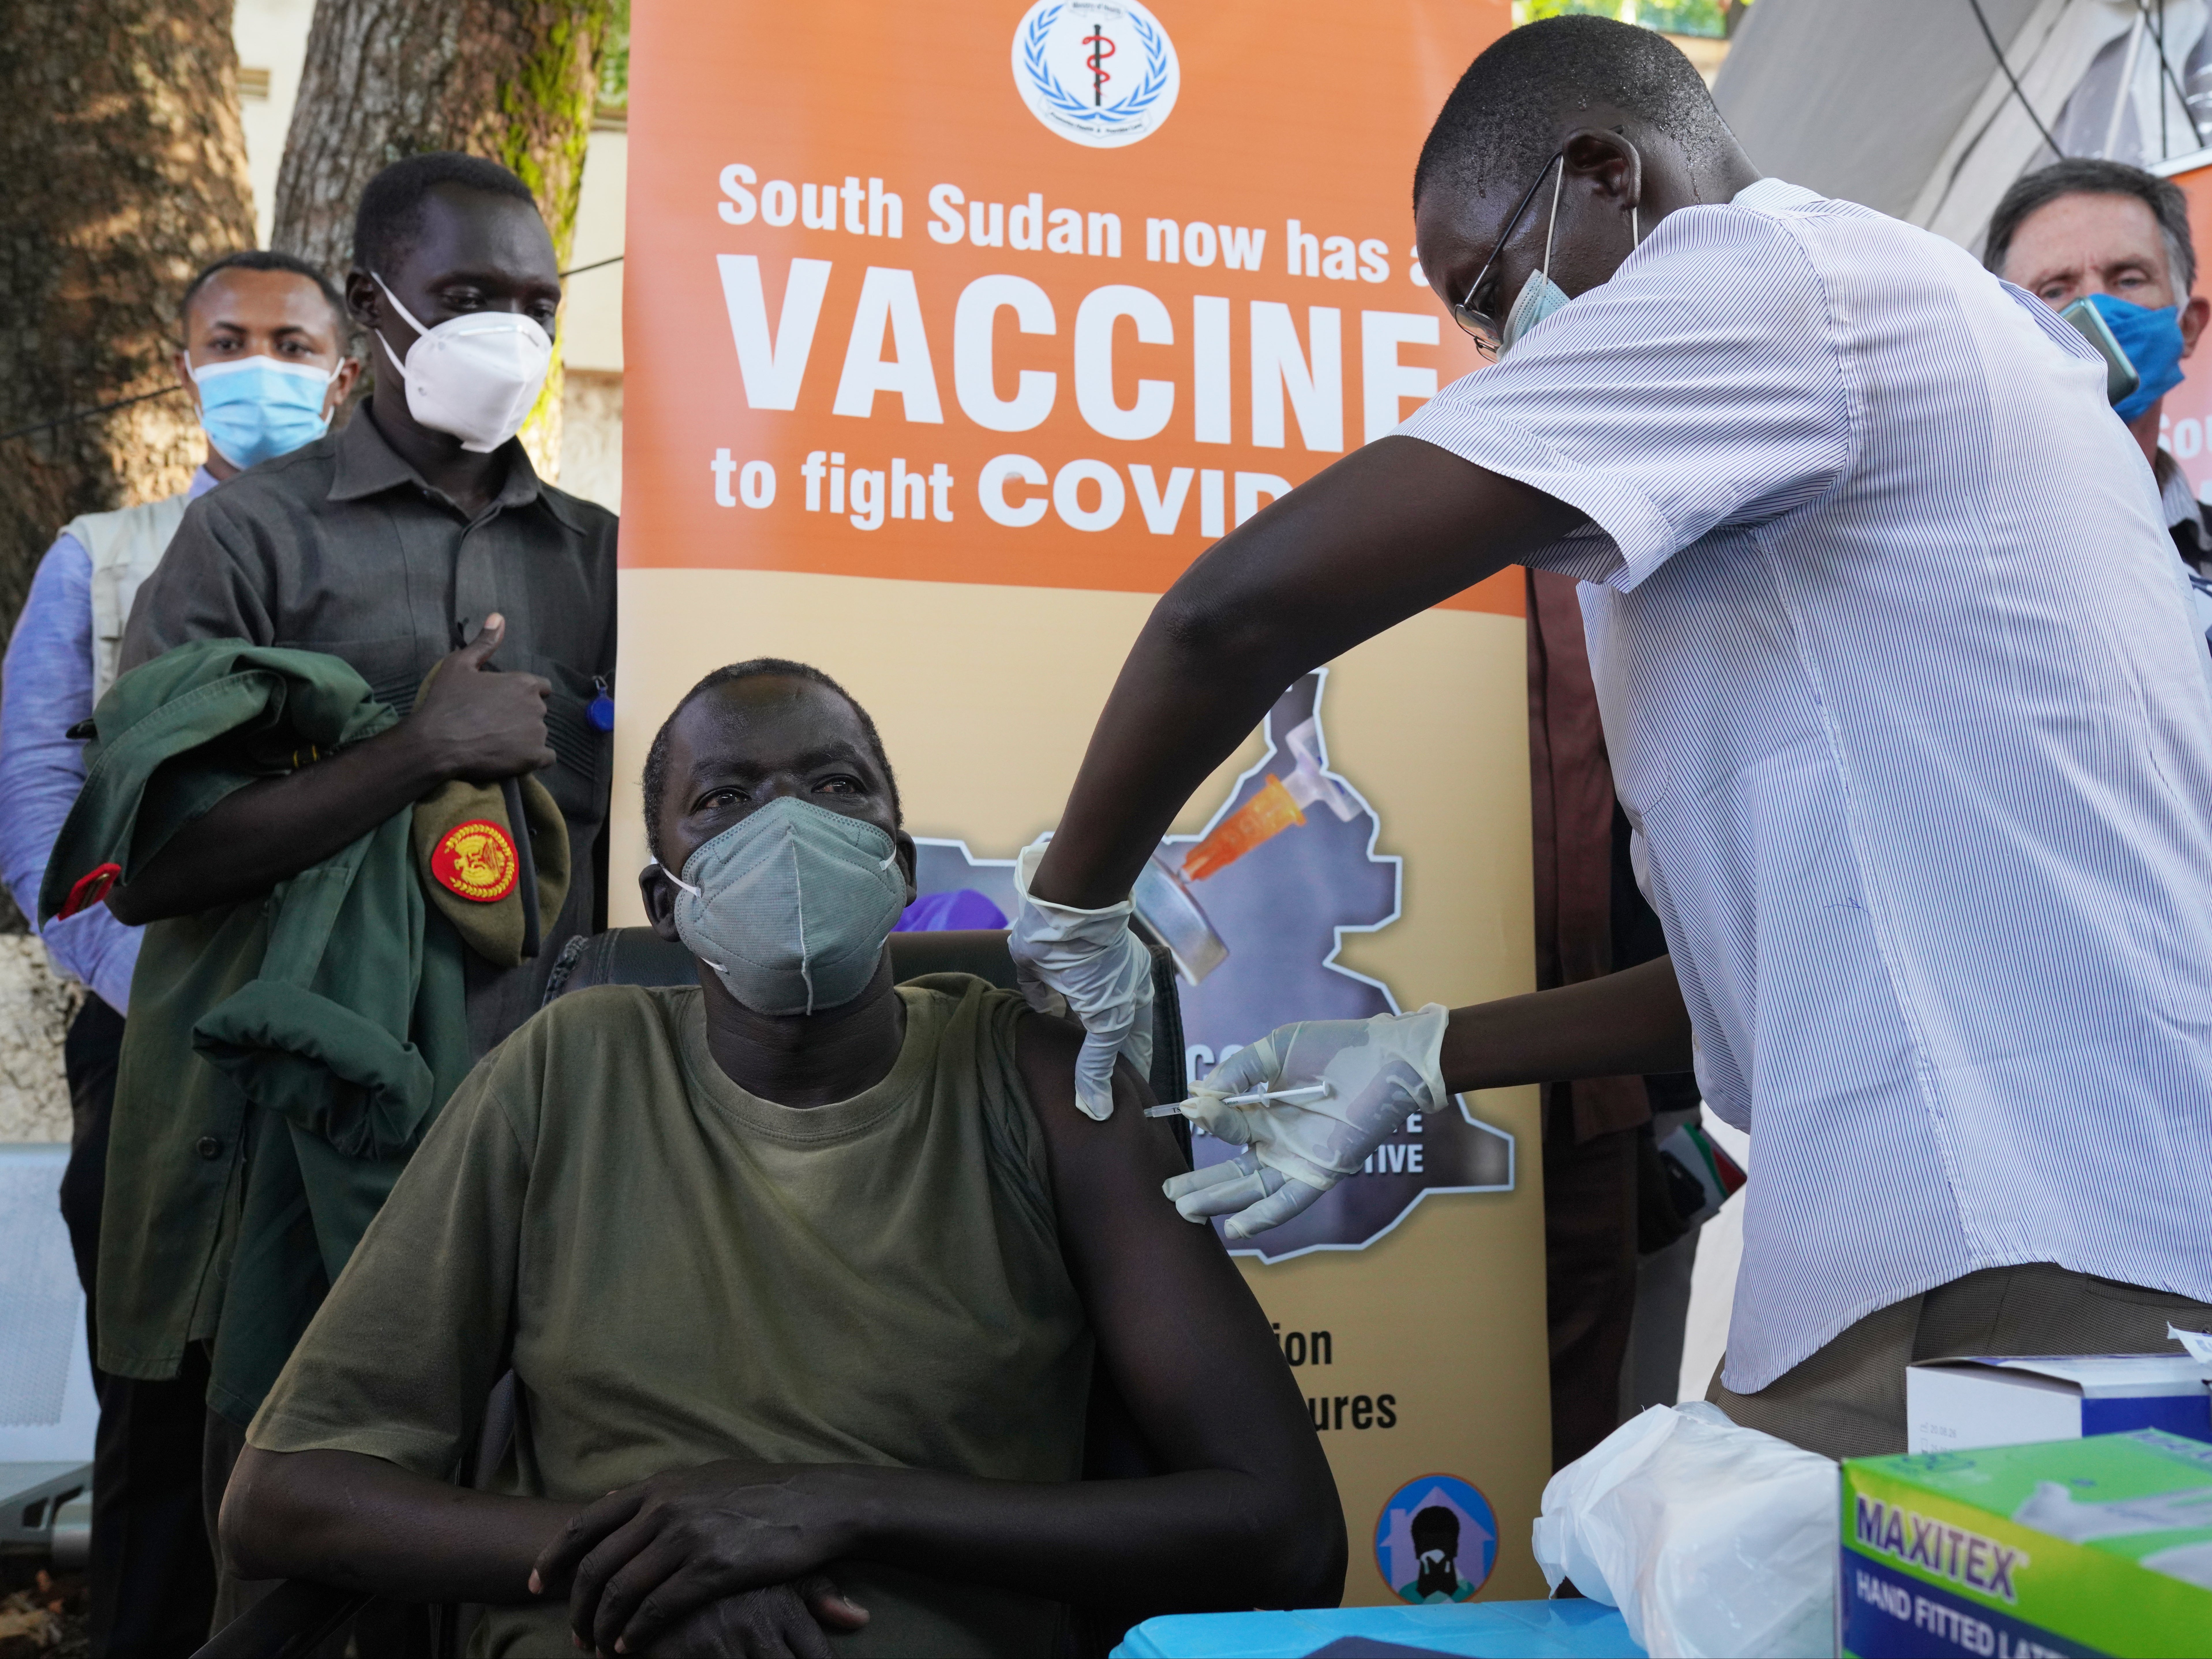 South Sudan has started vaccinating its population thanks to doses provided by Covax